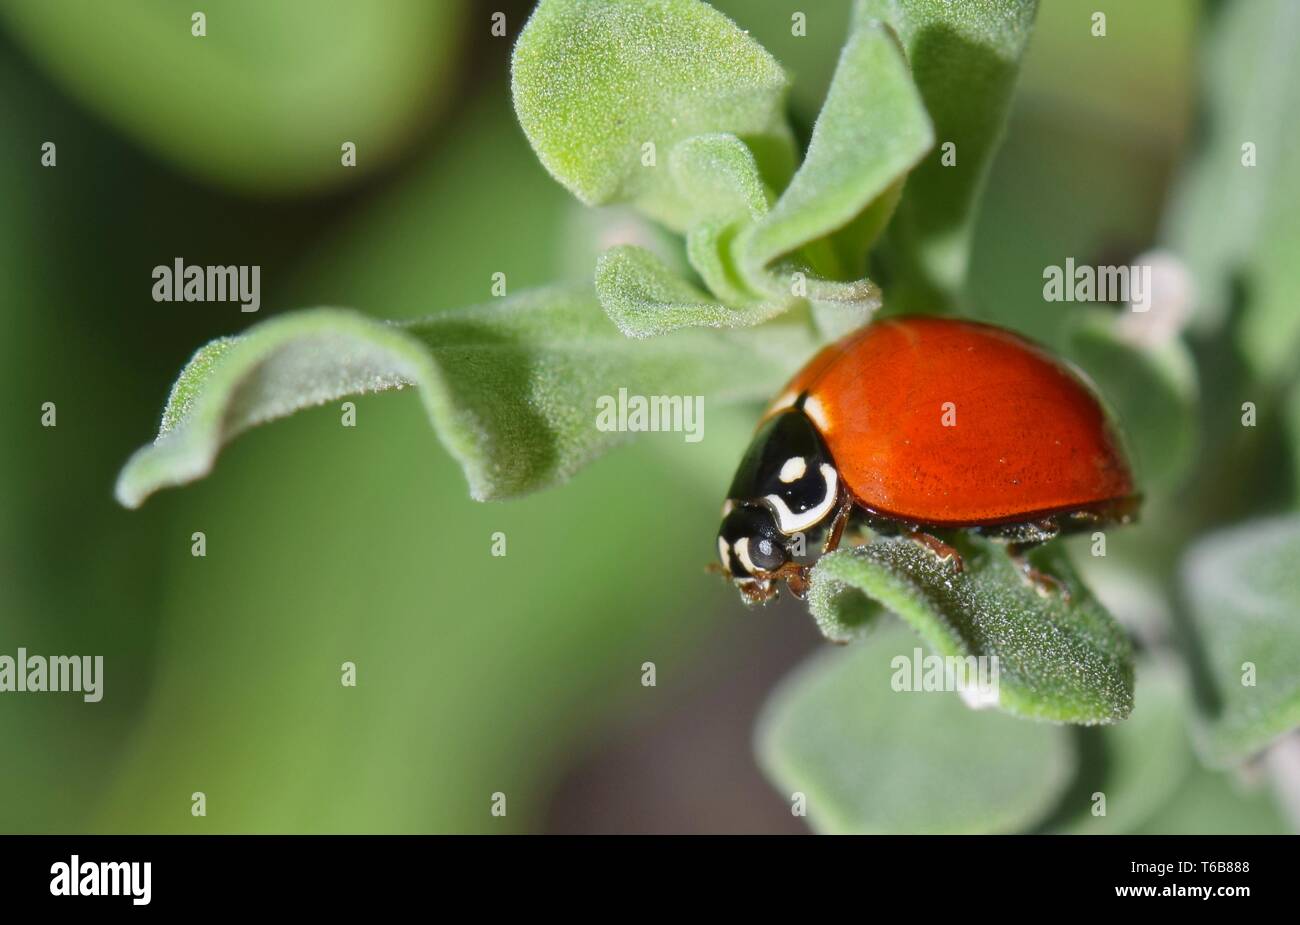 A Polished Lady Beetle (Cycloneda munda) wandering across leaves of a Barometer Bush during Springtime in Houston, TX. Stock Photo